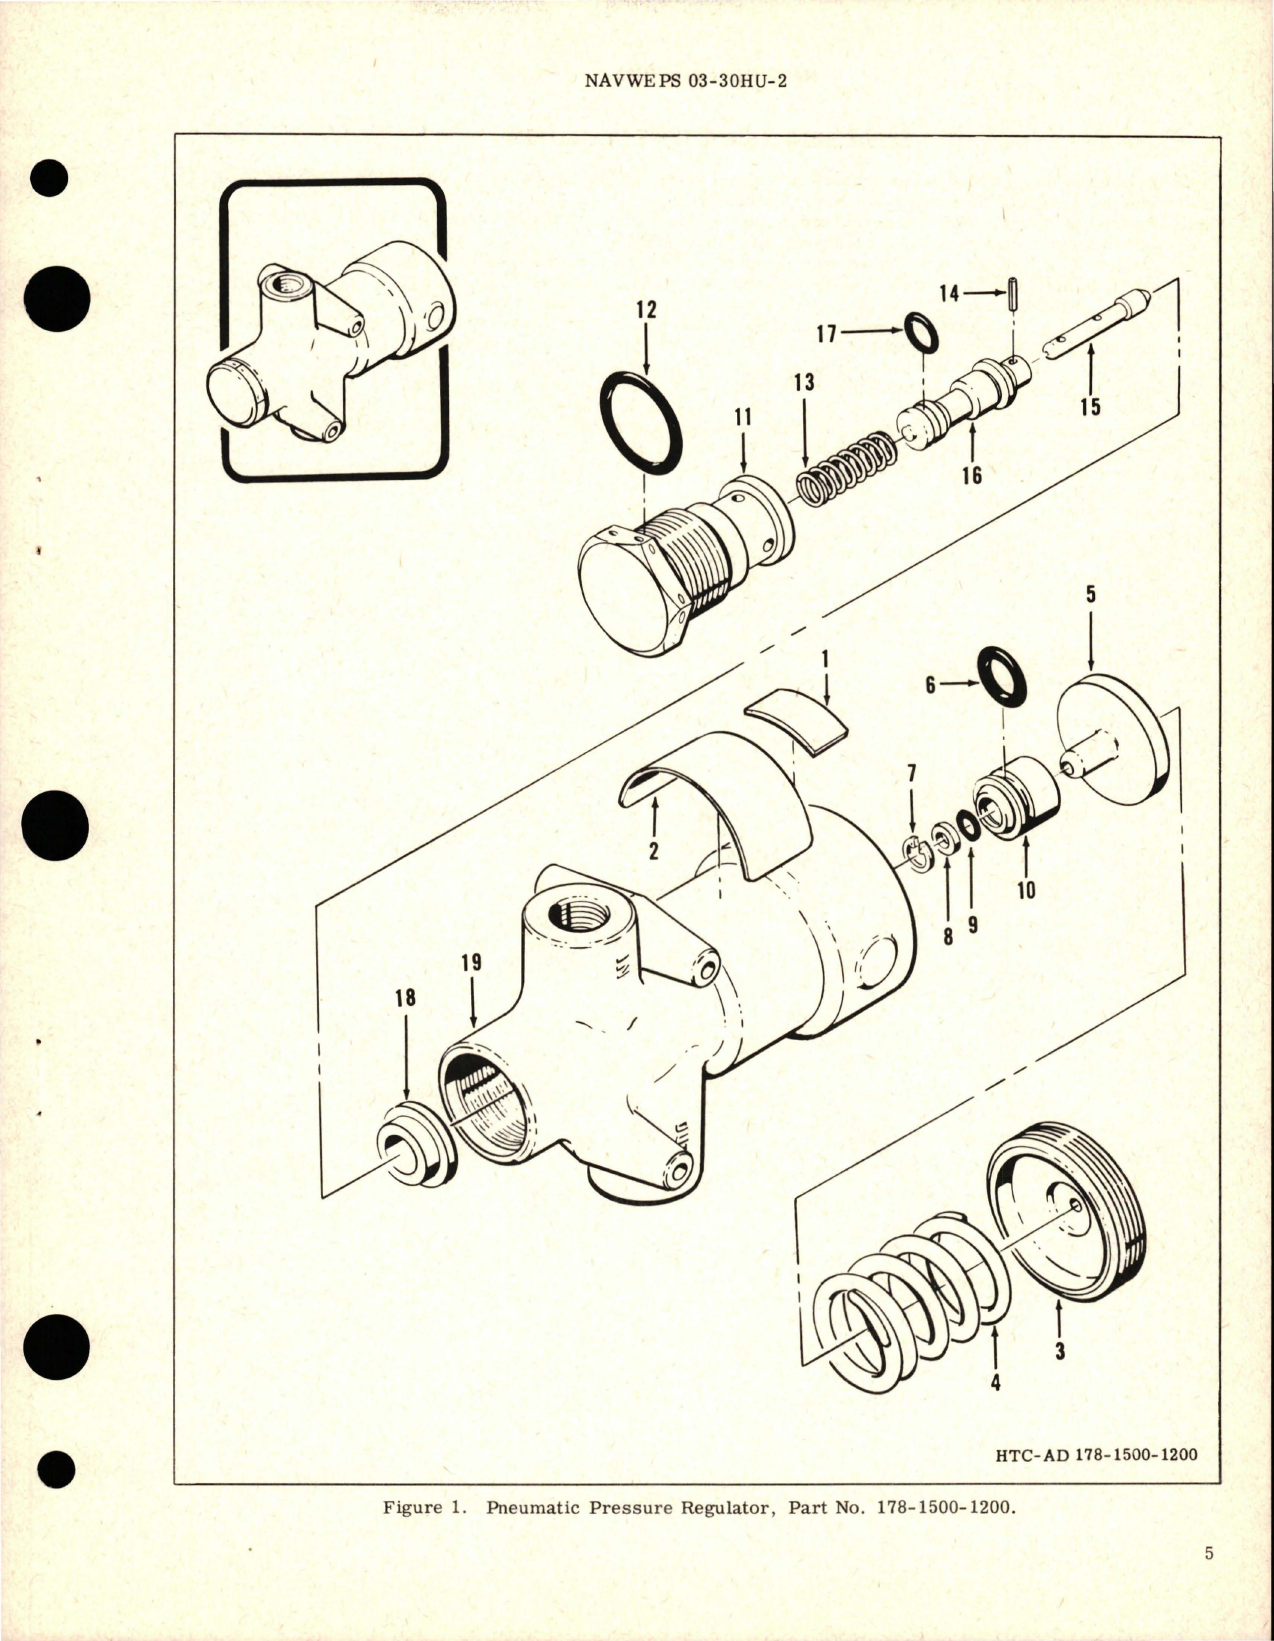 Sample page 5 from AirCorps Library document: Overhaul Instructions with Parts Breakdown for Pneumatic Pressure Regulator Assembly - Part 178-1500-1200 